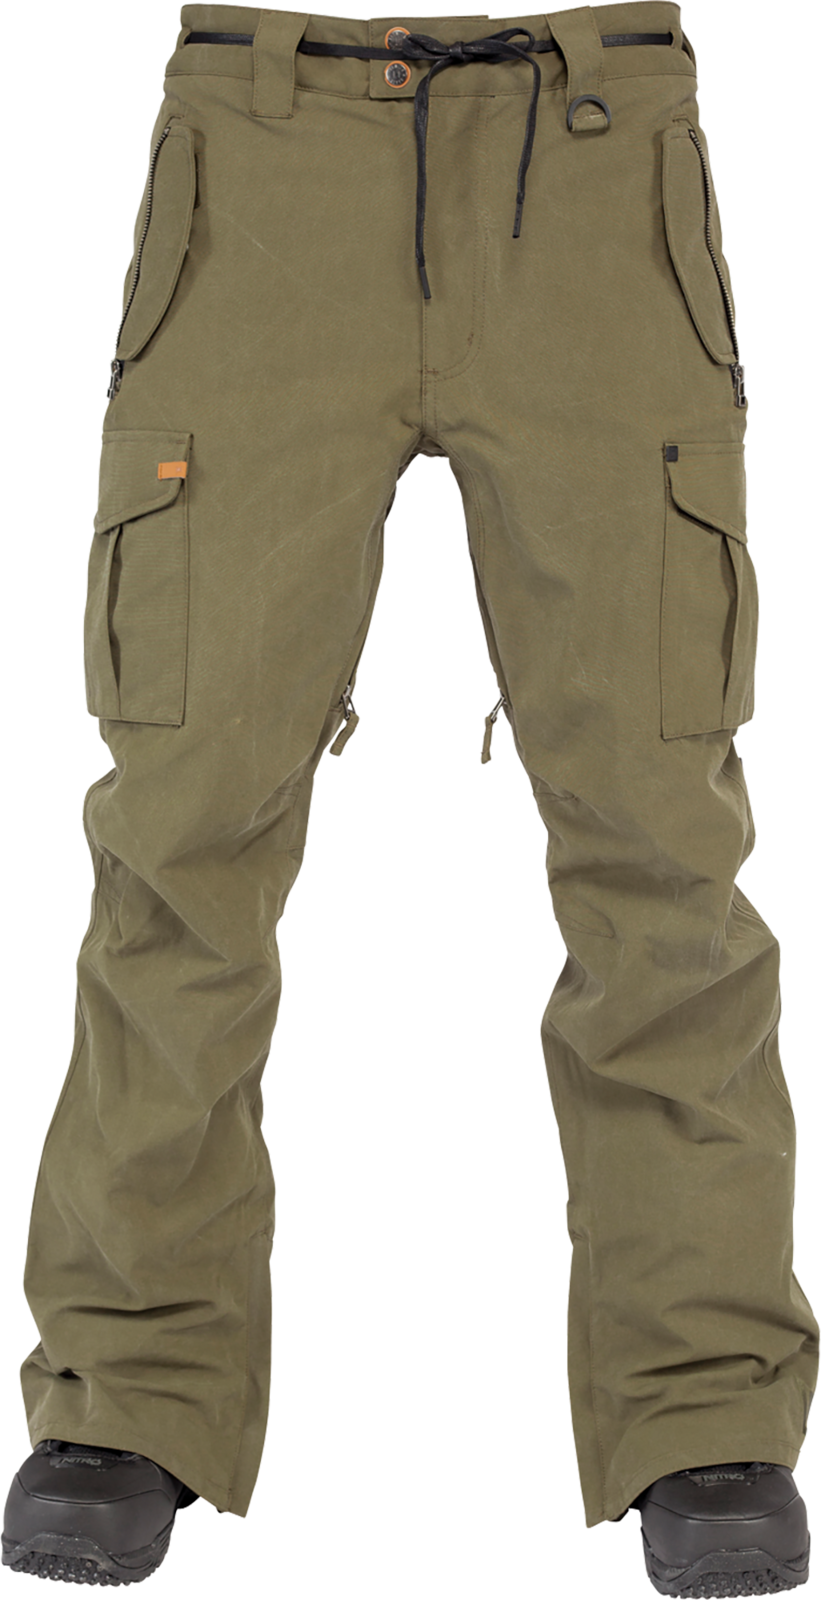 Cargo Pant PNG Transparent Images | PNG All